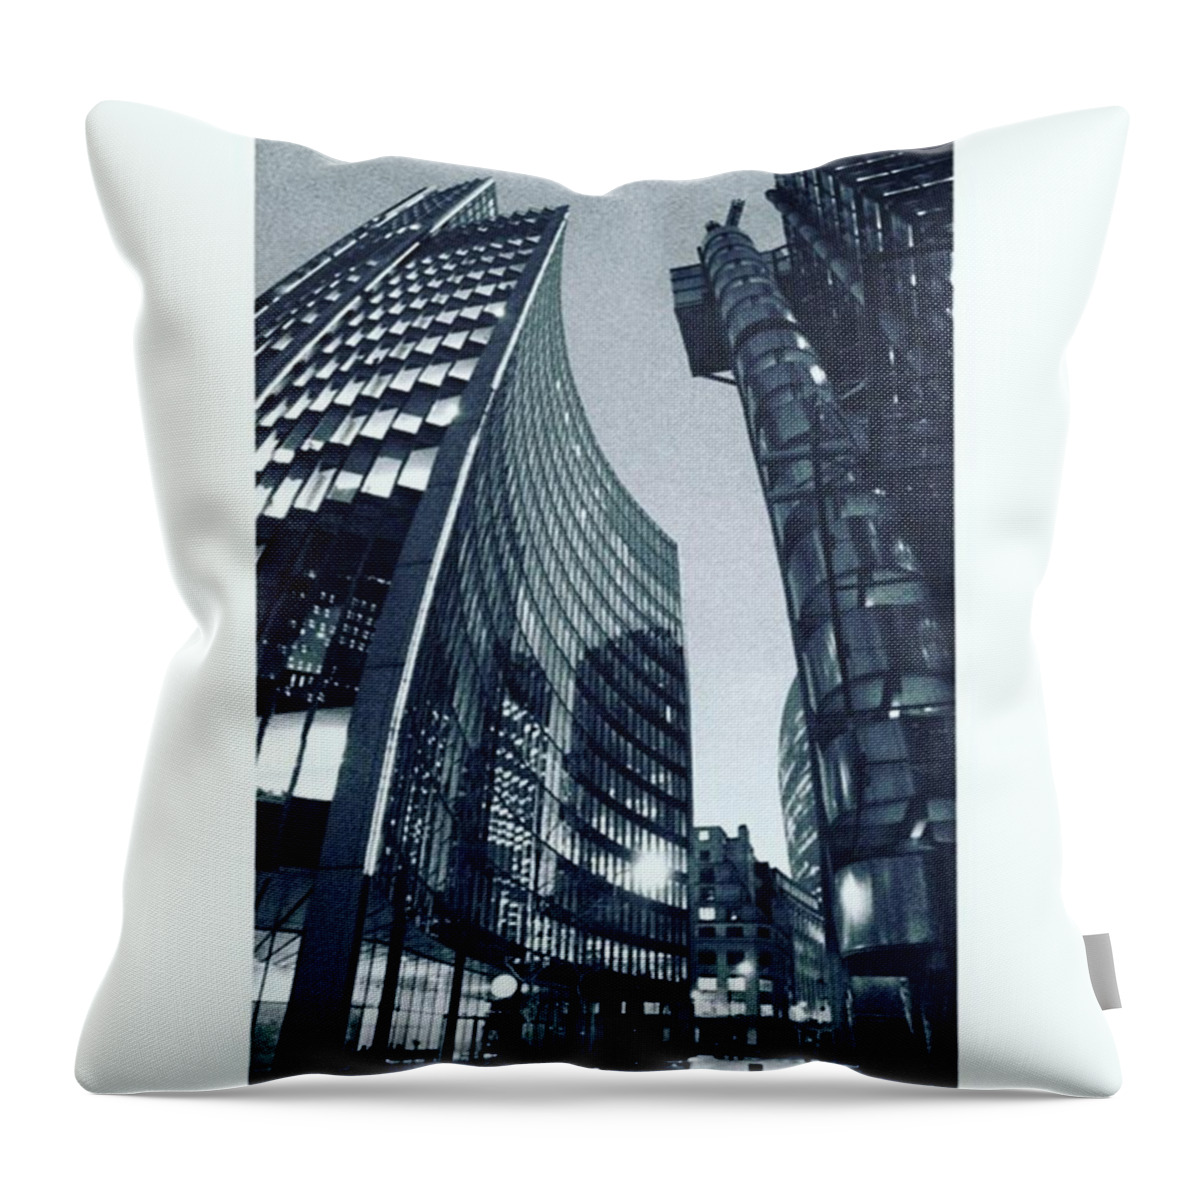 My_bestshot Throw Pillow featuring the photograph Looking Up.

#towerlife #tower by Tai Lacroix